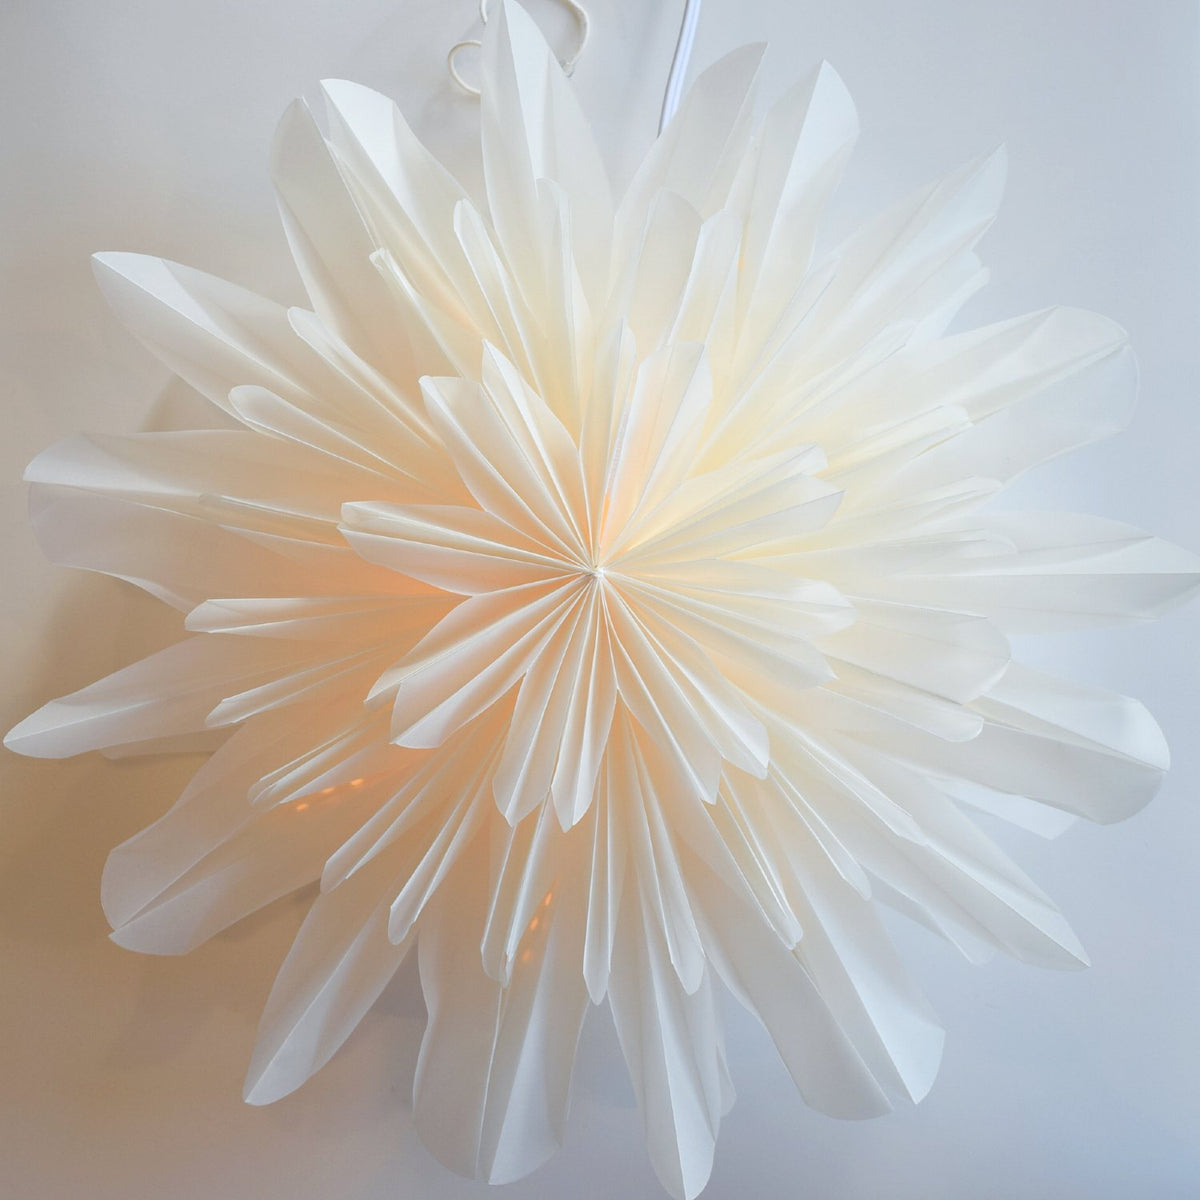 32" White Snowfall Snowflake Star Lantern Pizzelle Design - Great With or Without Lights - Ideal for Holiday and Snowflake Decorations, Weddings, Parties, and Home Decor